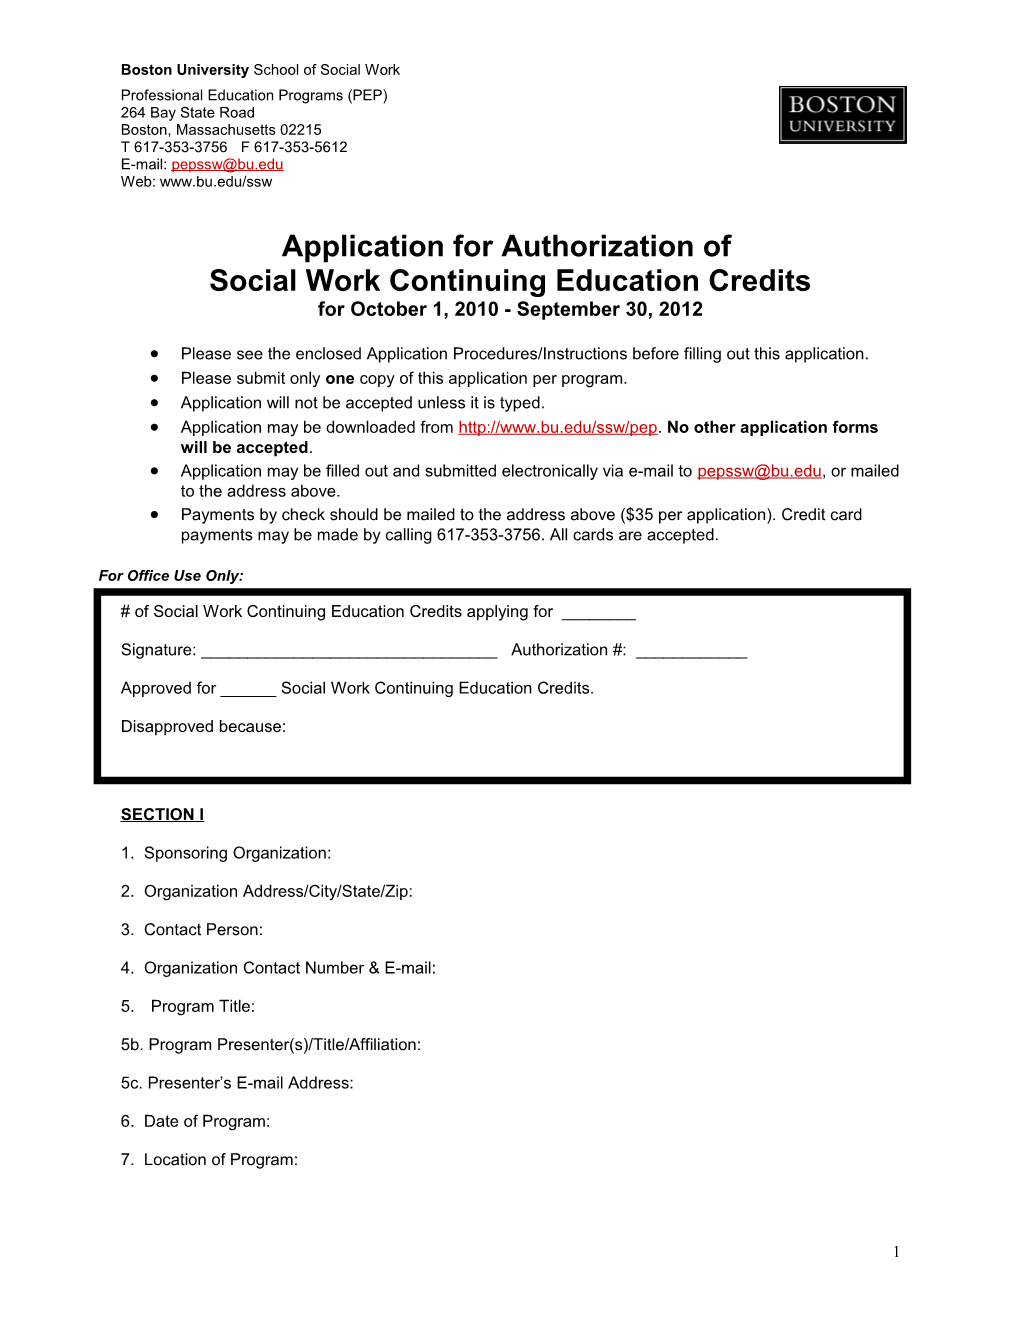 Application for Authorization of Category I